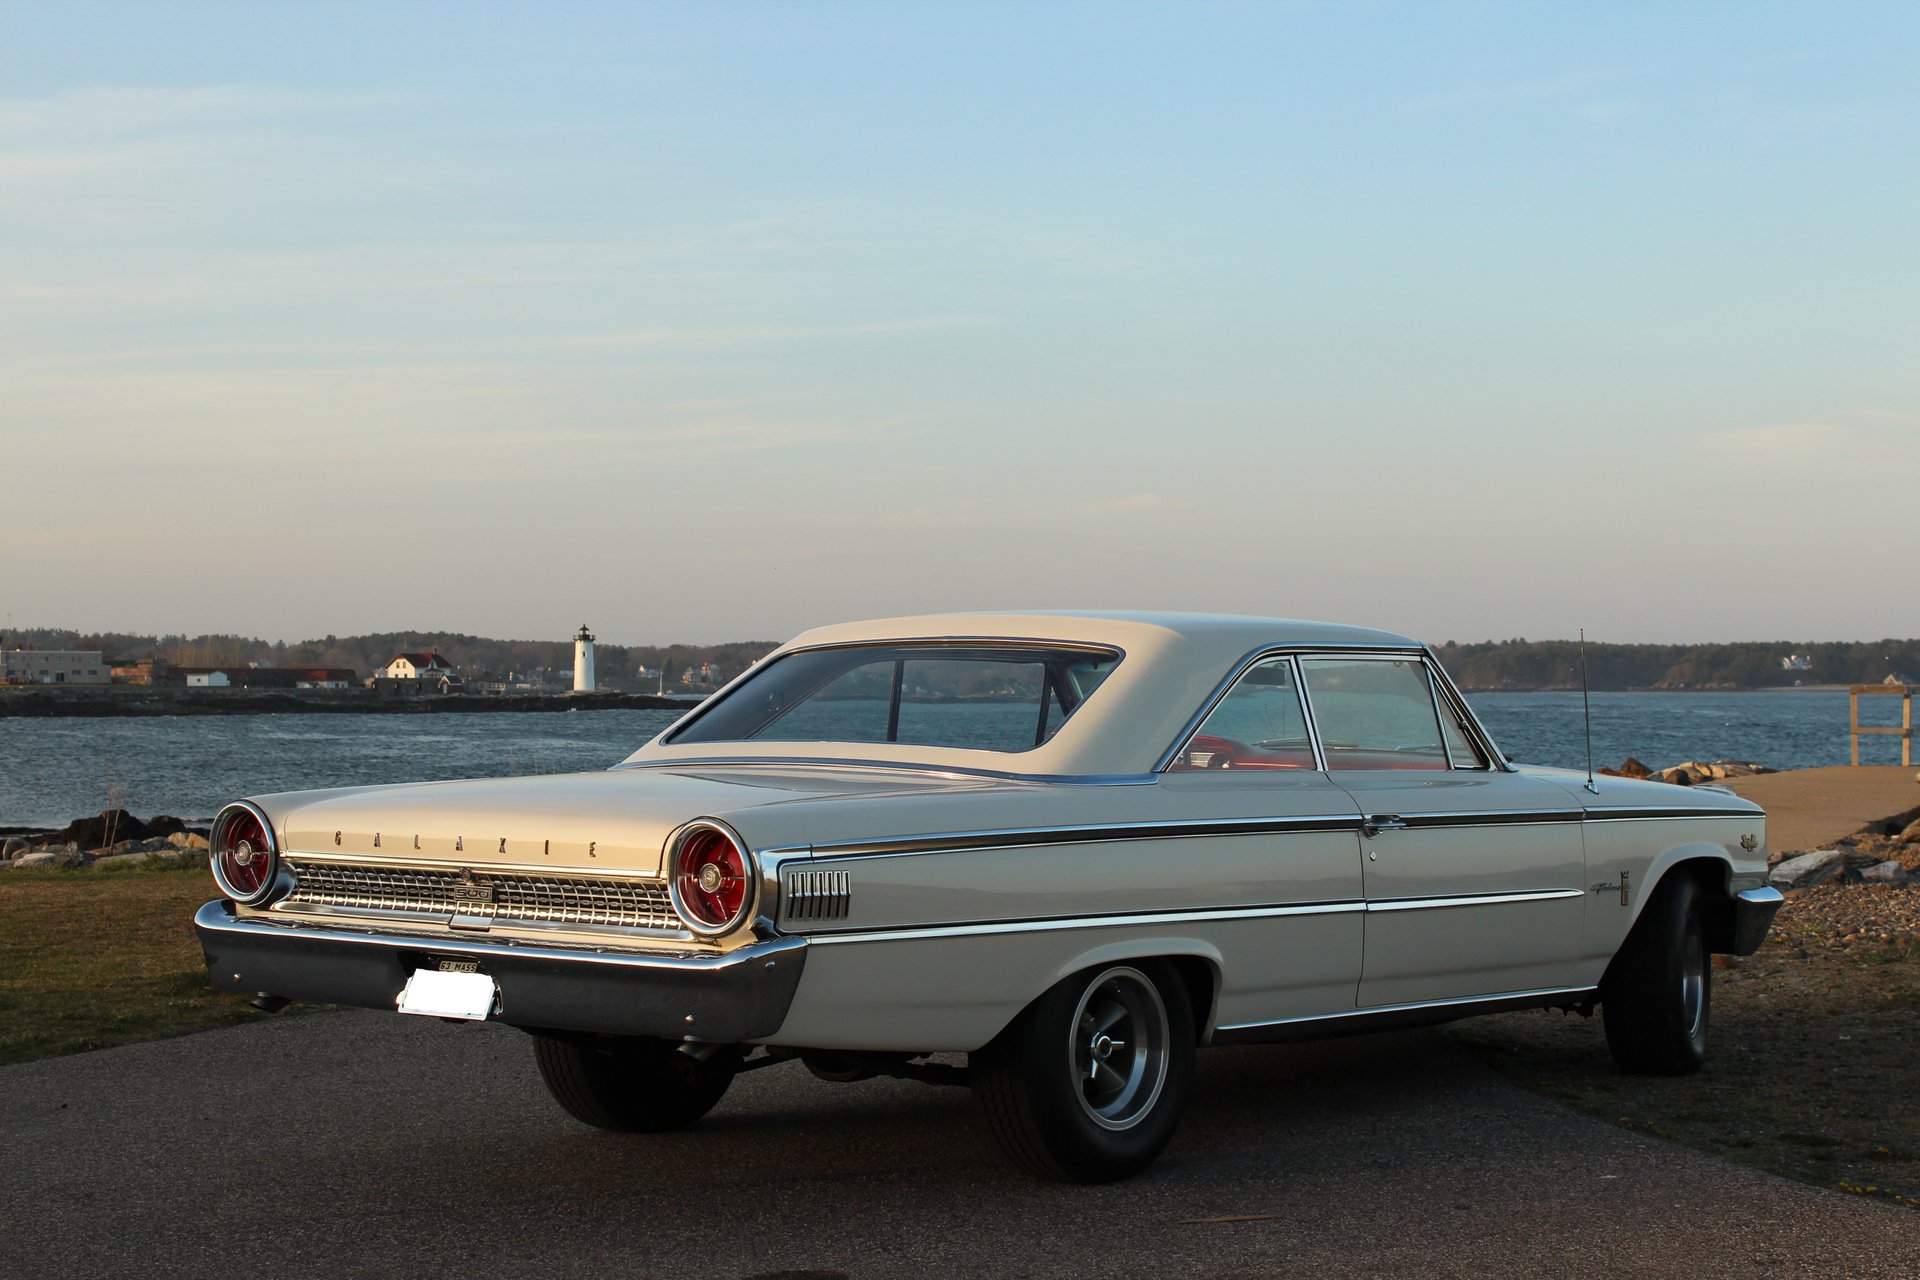 1963 Ford Galaxie 500 Legendary Motors Classic Cars Muscle Cars Hot Rods Antique Cars Rowley Ma